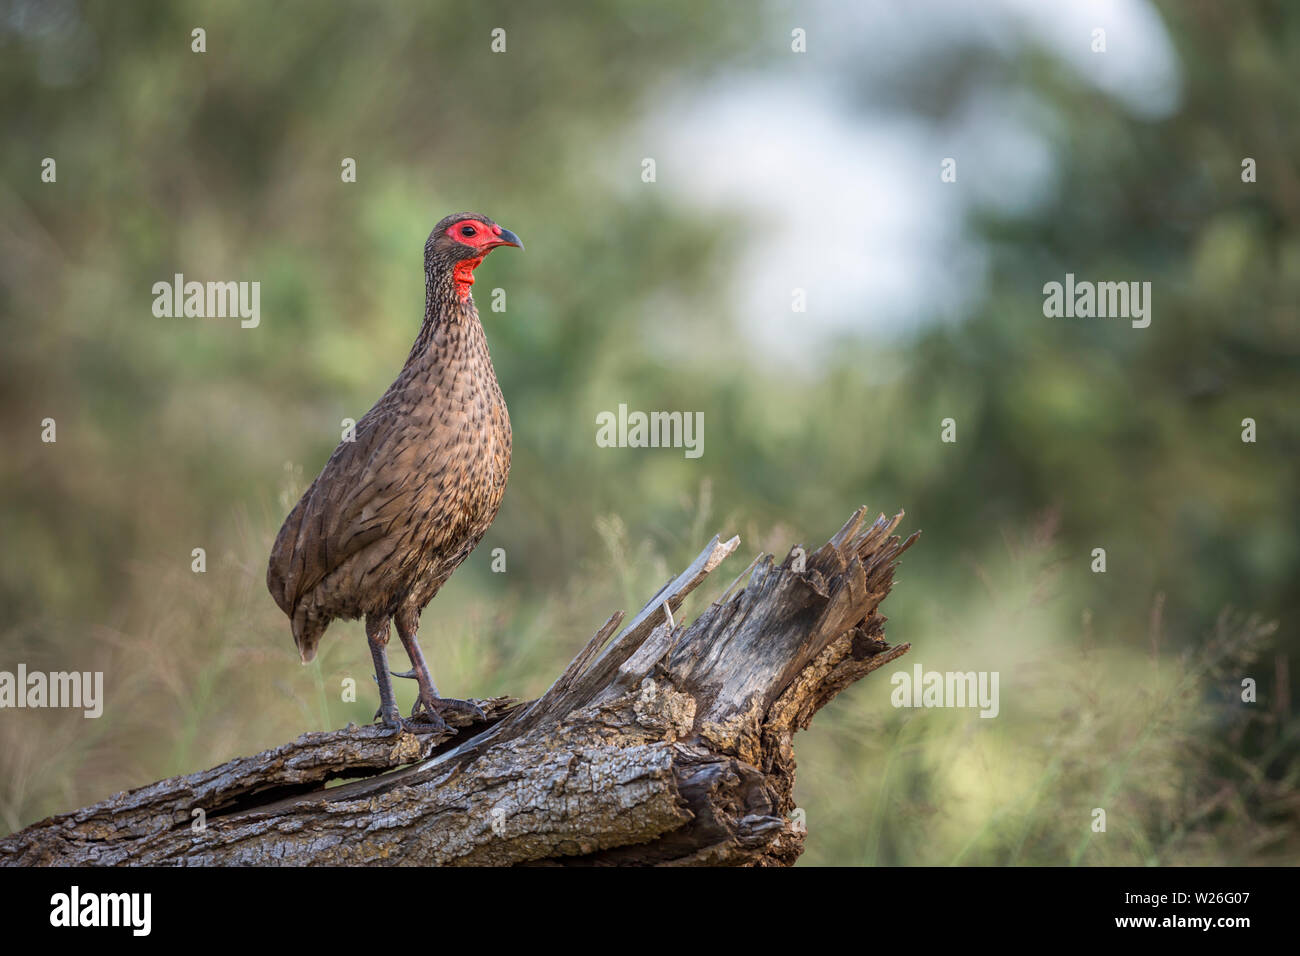 Swainson's Spurfowl perched on a log in Kruger National park, South Africa ; Specie Pternistis swainsonii family of Phasianidae Stock Photo